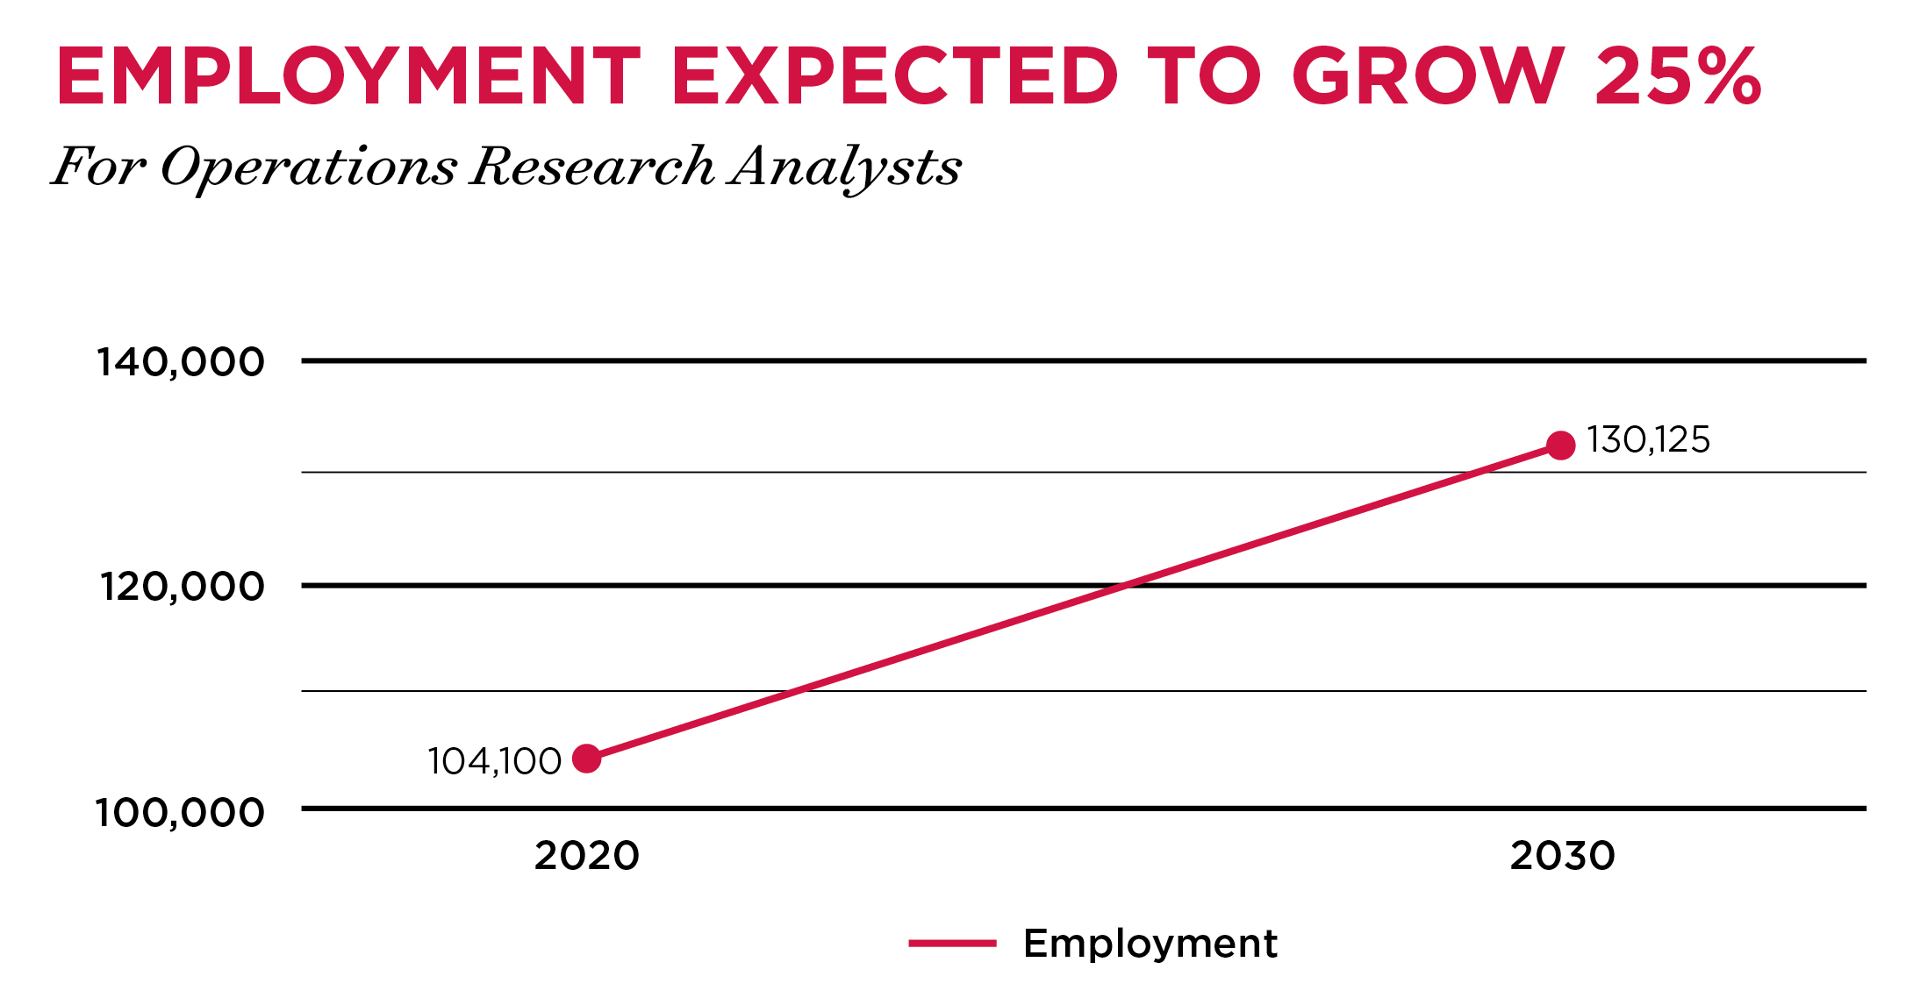 Employment expected to grow 25% for Operations Research Analysts.